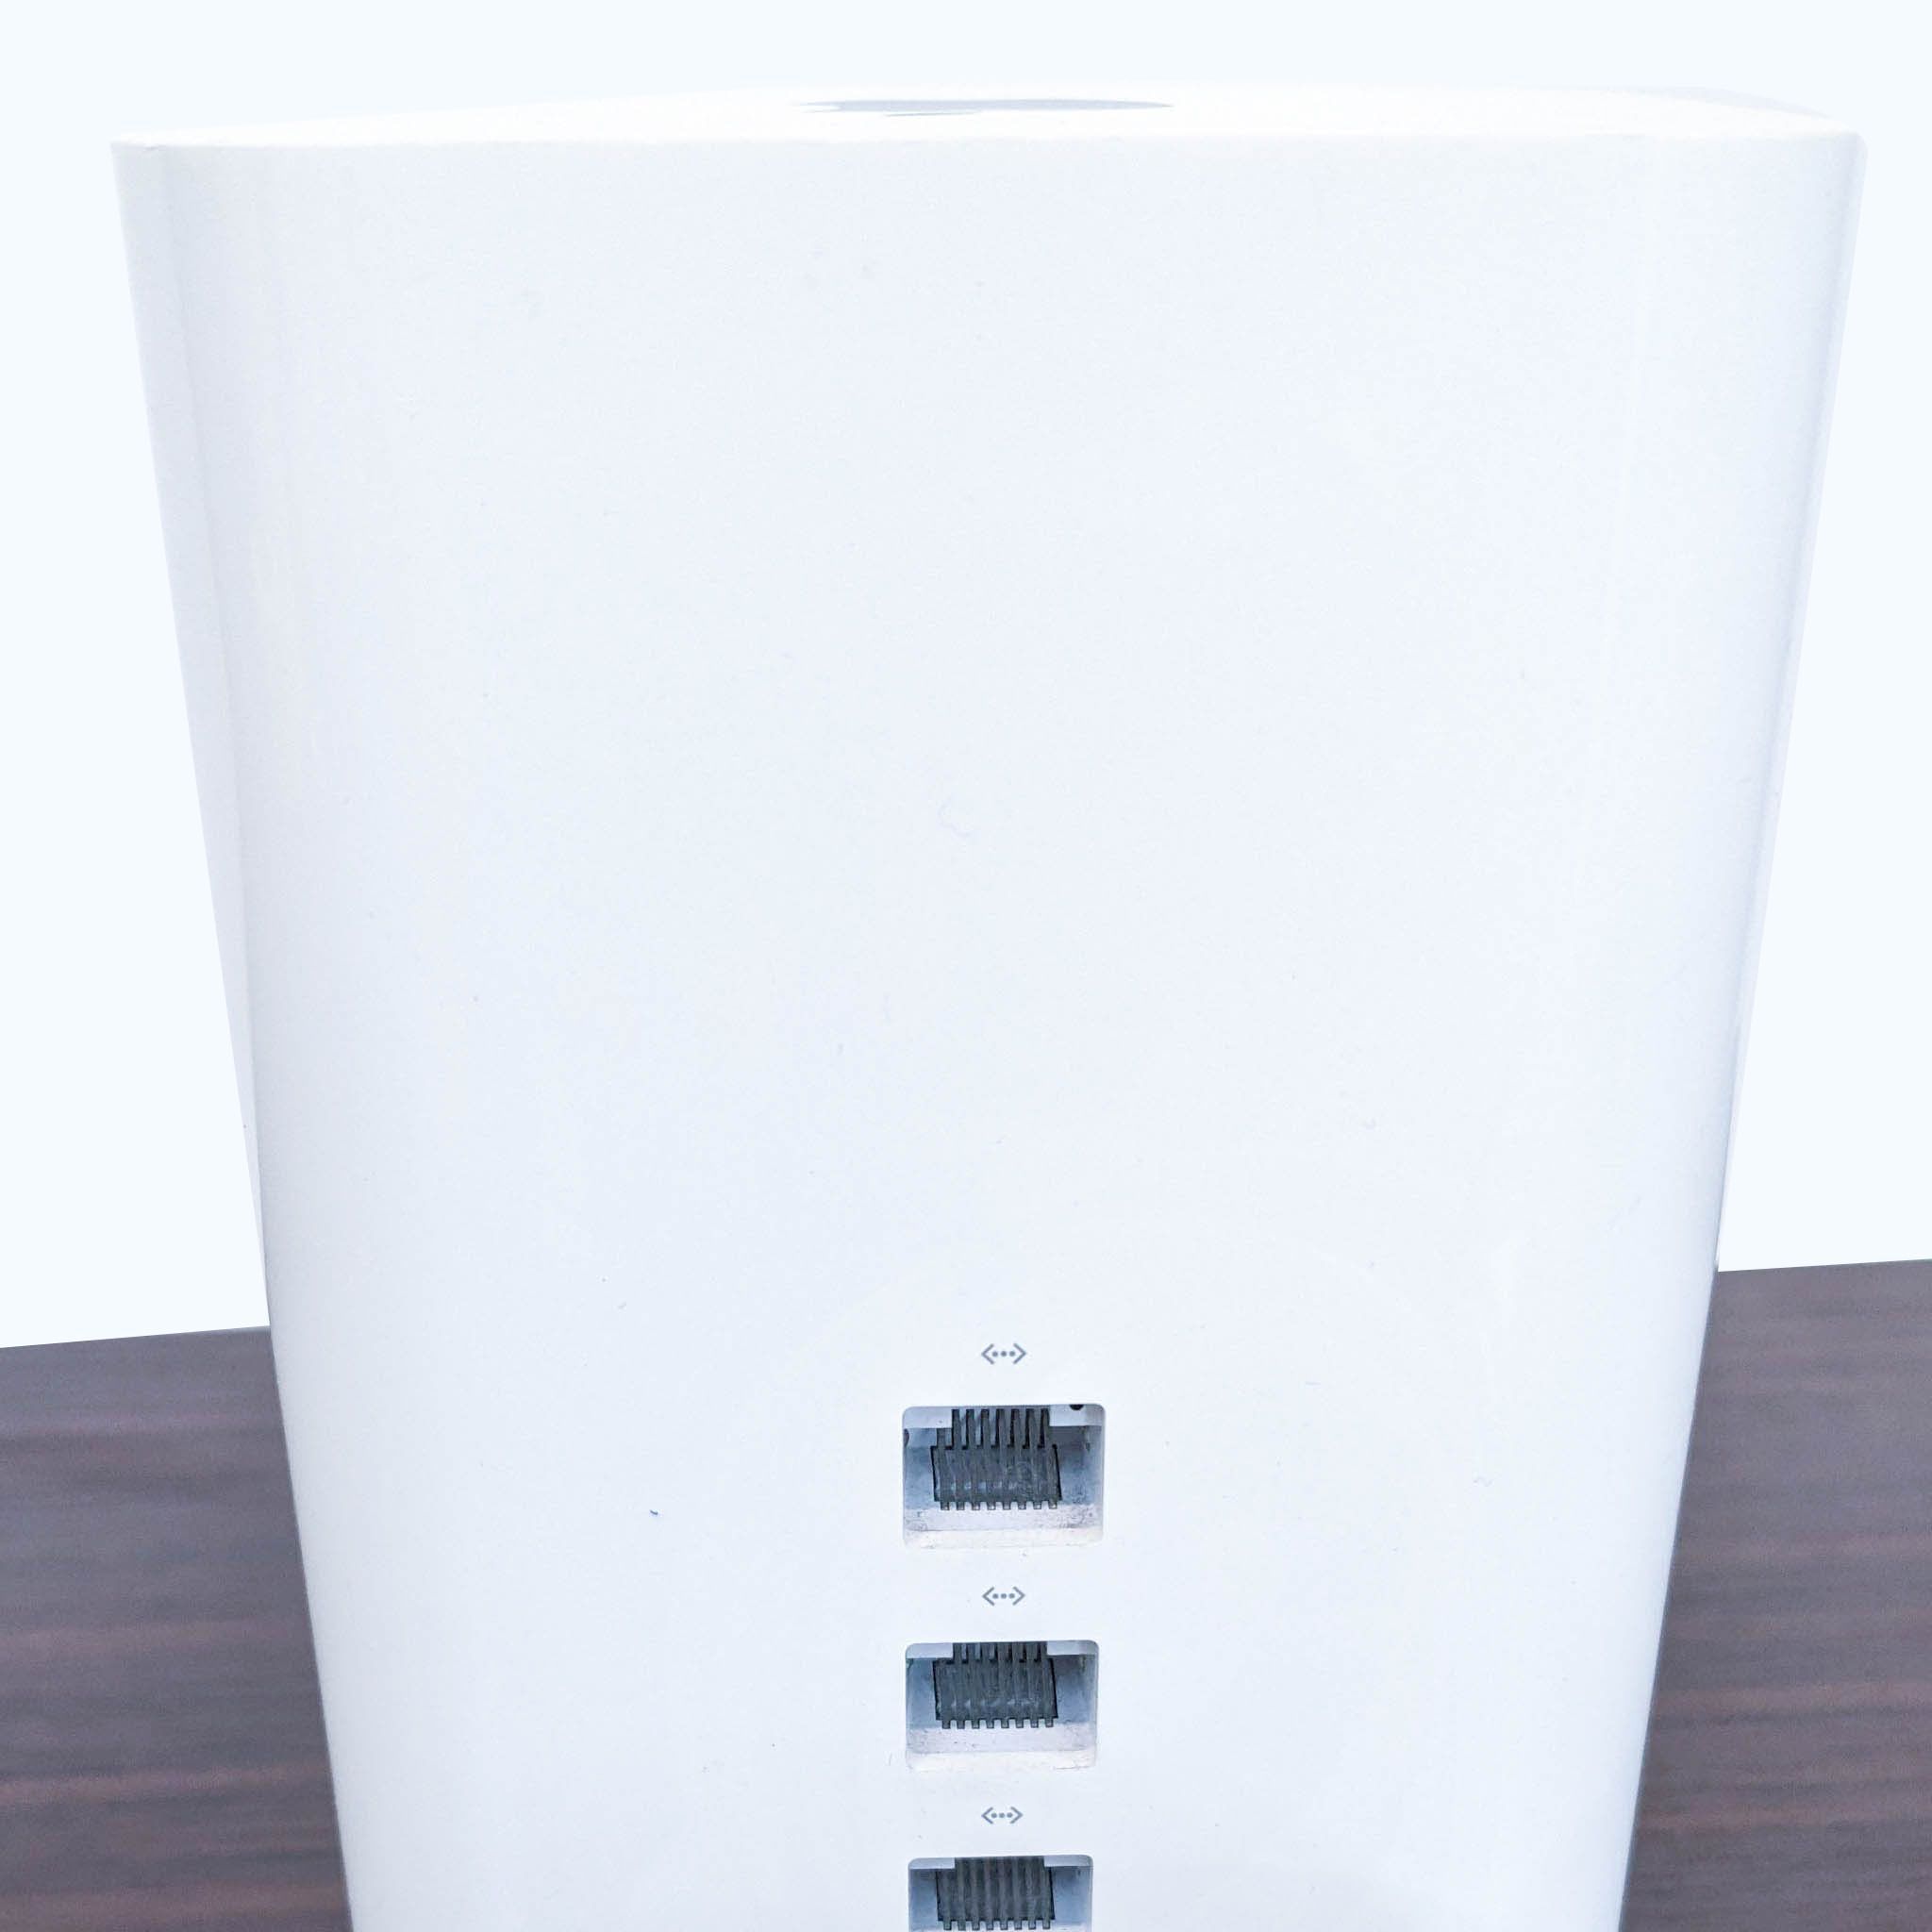 Gently used white cylindrical Apple networking device with multiple ports visible, on a wooden surface.